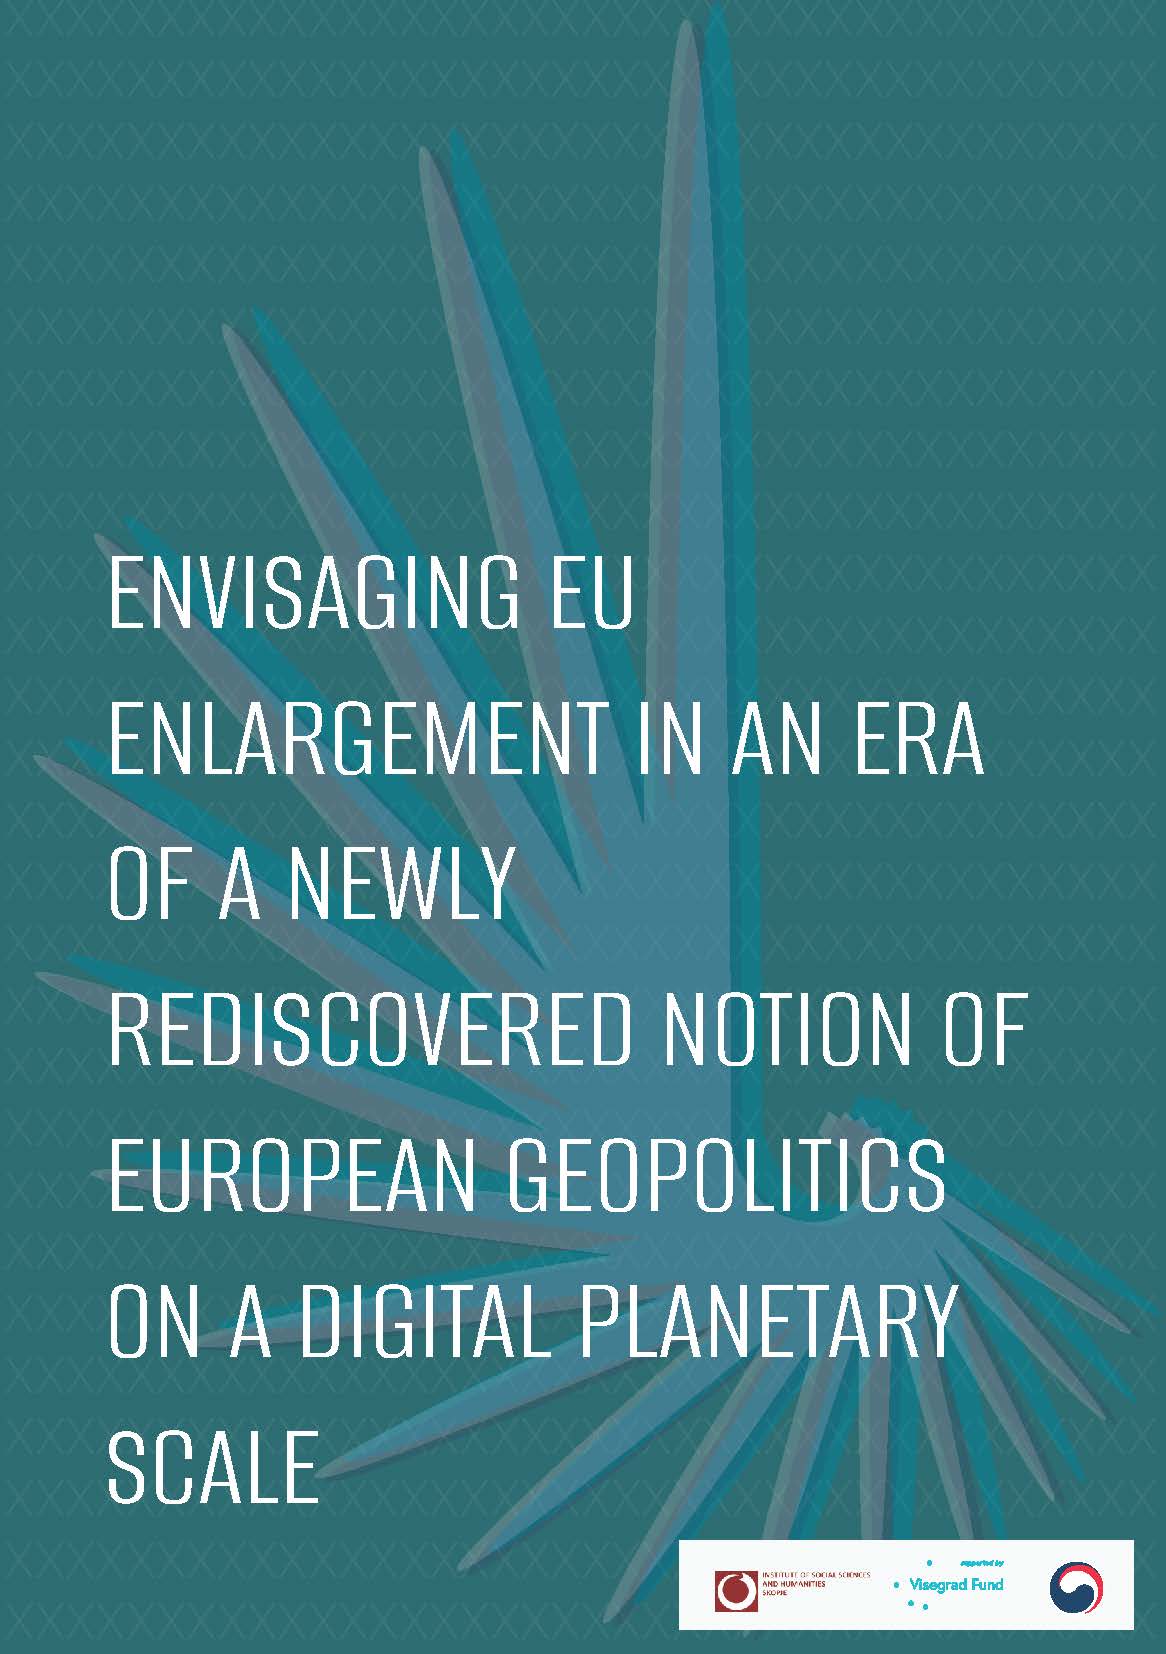 Envisaging EU Enlargement in an Era of a Newly Rediscovered Notion of European Geopolitics on a Digital Planetary Scale